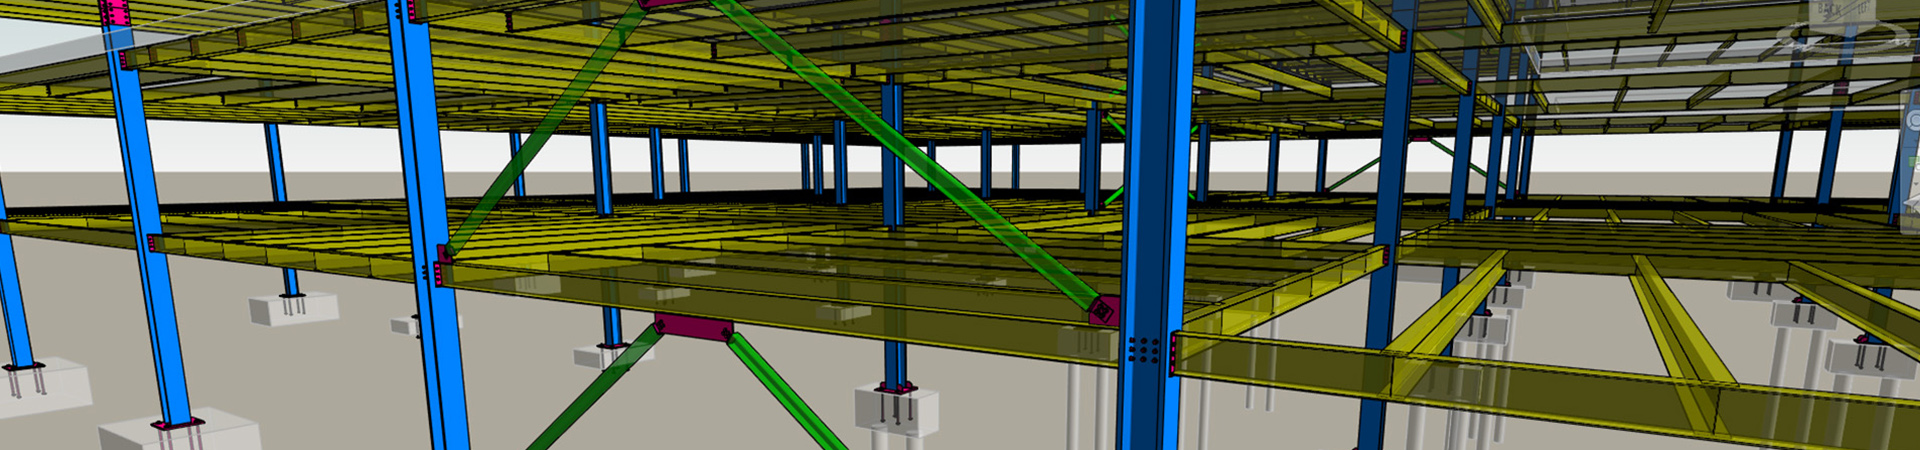 CAD drawing of connections in structural steelwork